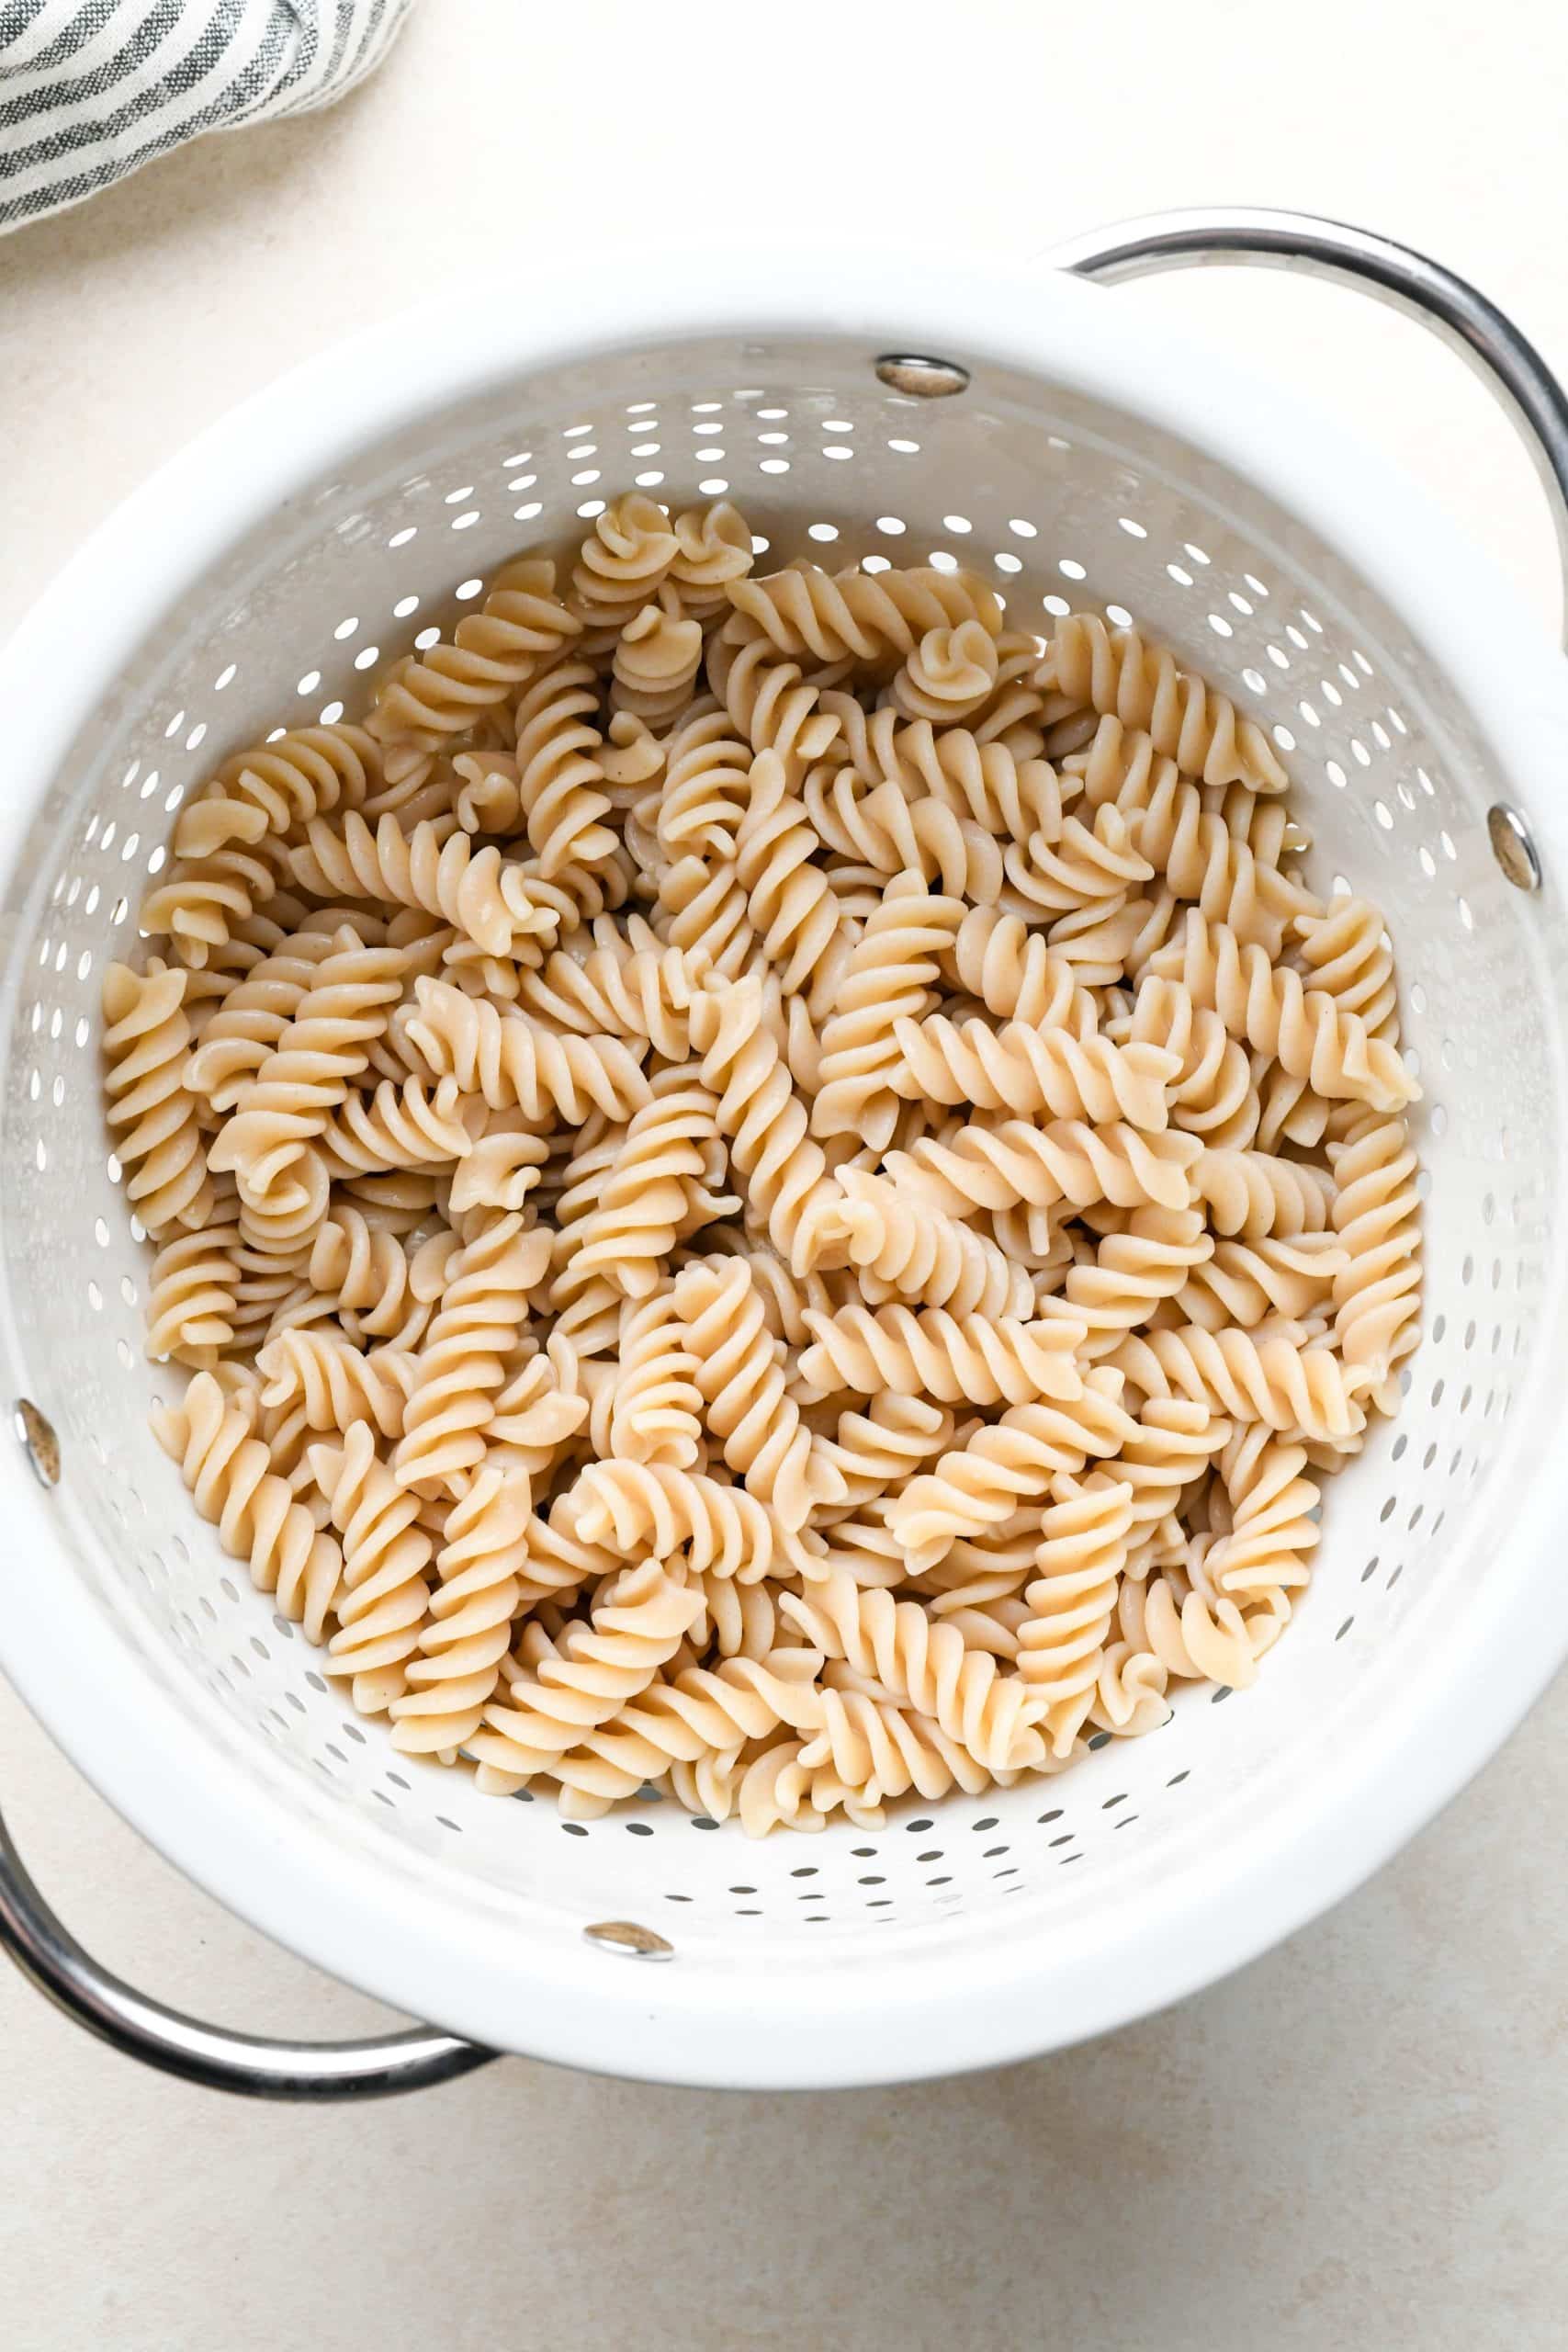 How to make buffalo chicken pasta: Gluten free pasta cooked and drained in a colander.